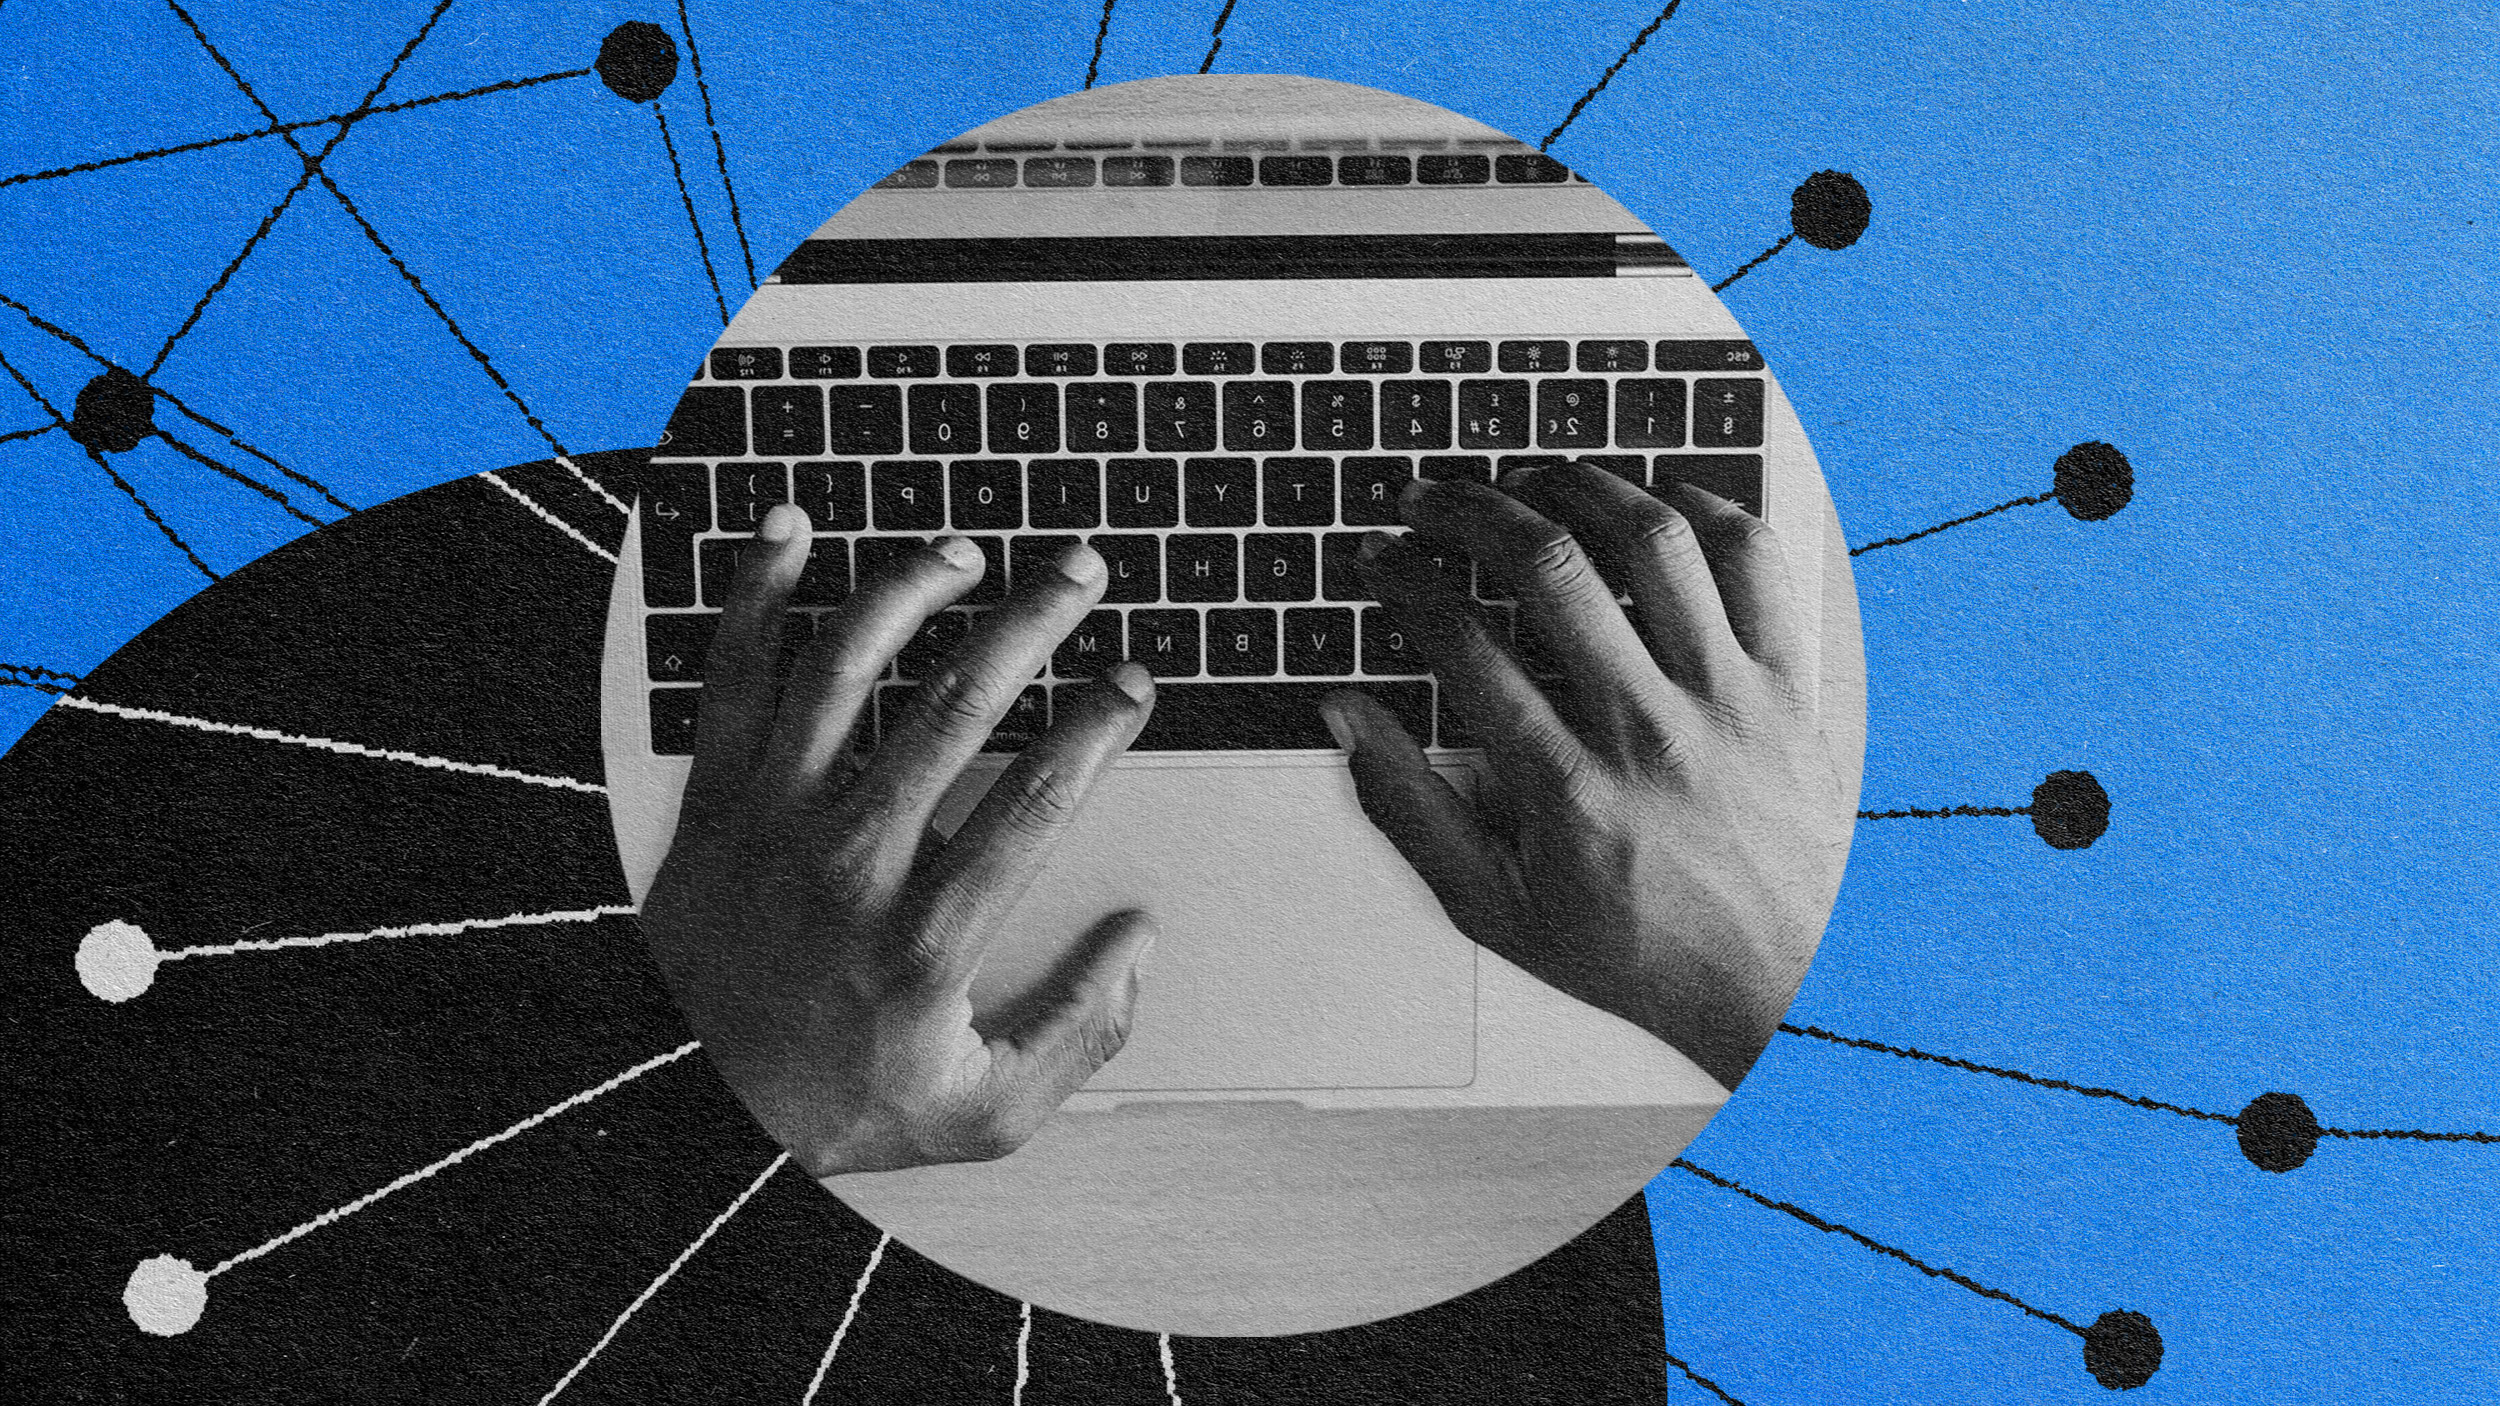 A black and white illustration of a person typing on a laptop within the workforce ecosystem.